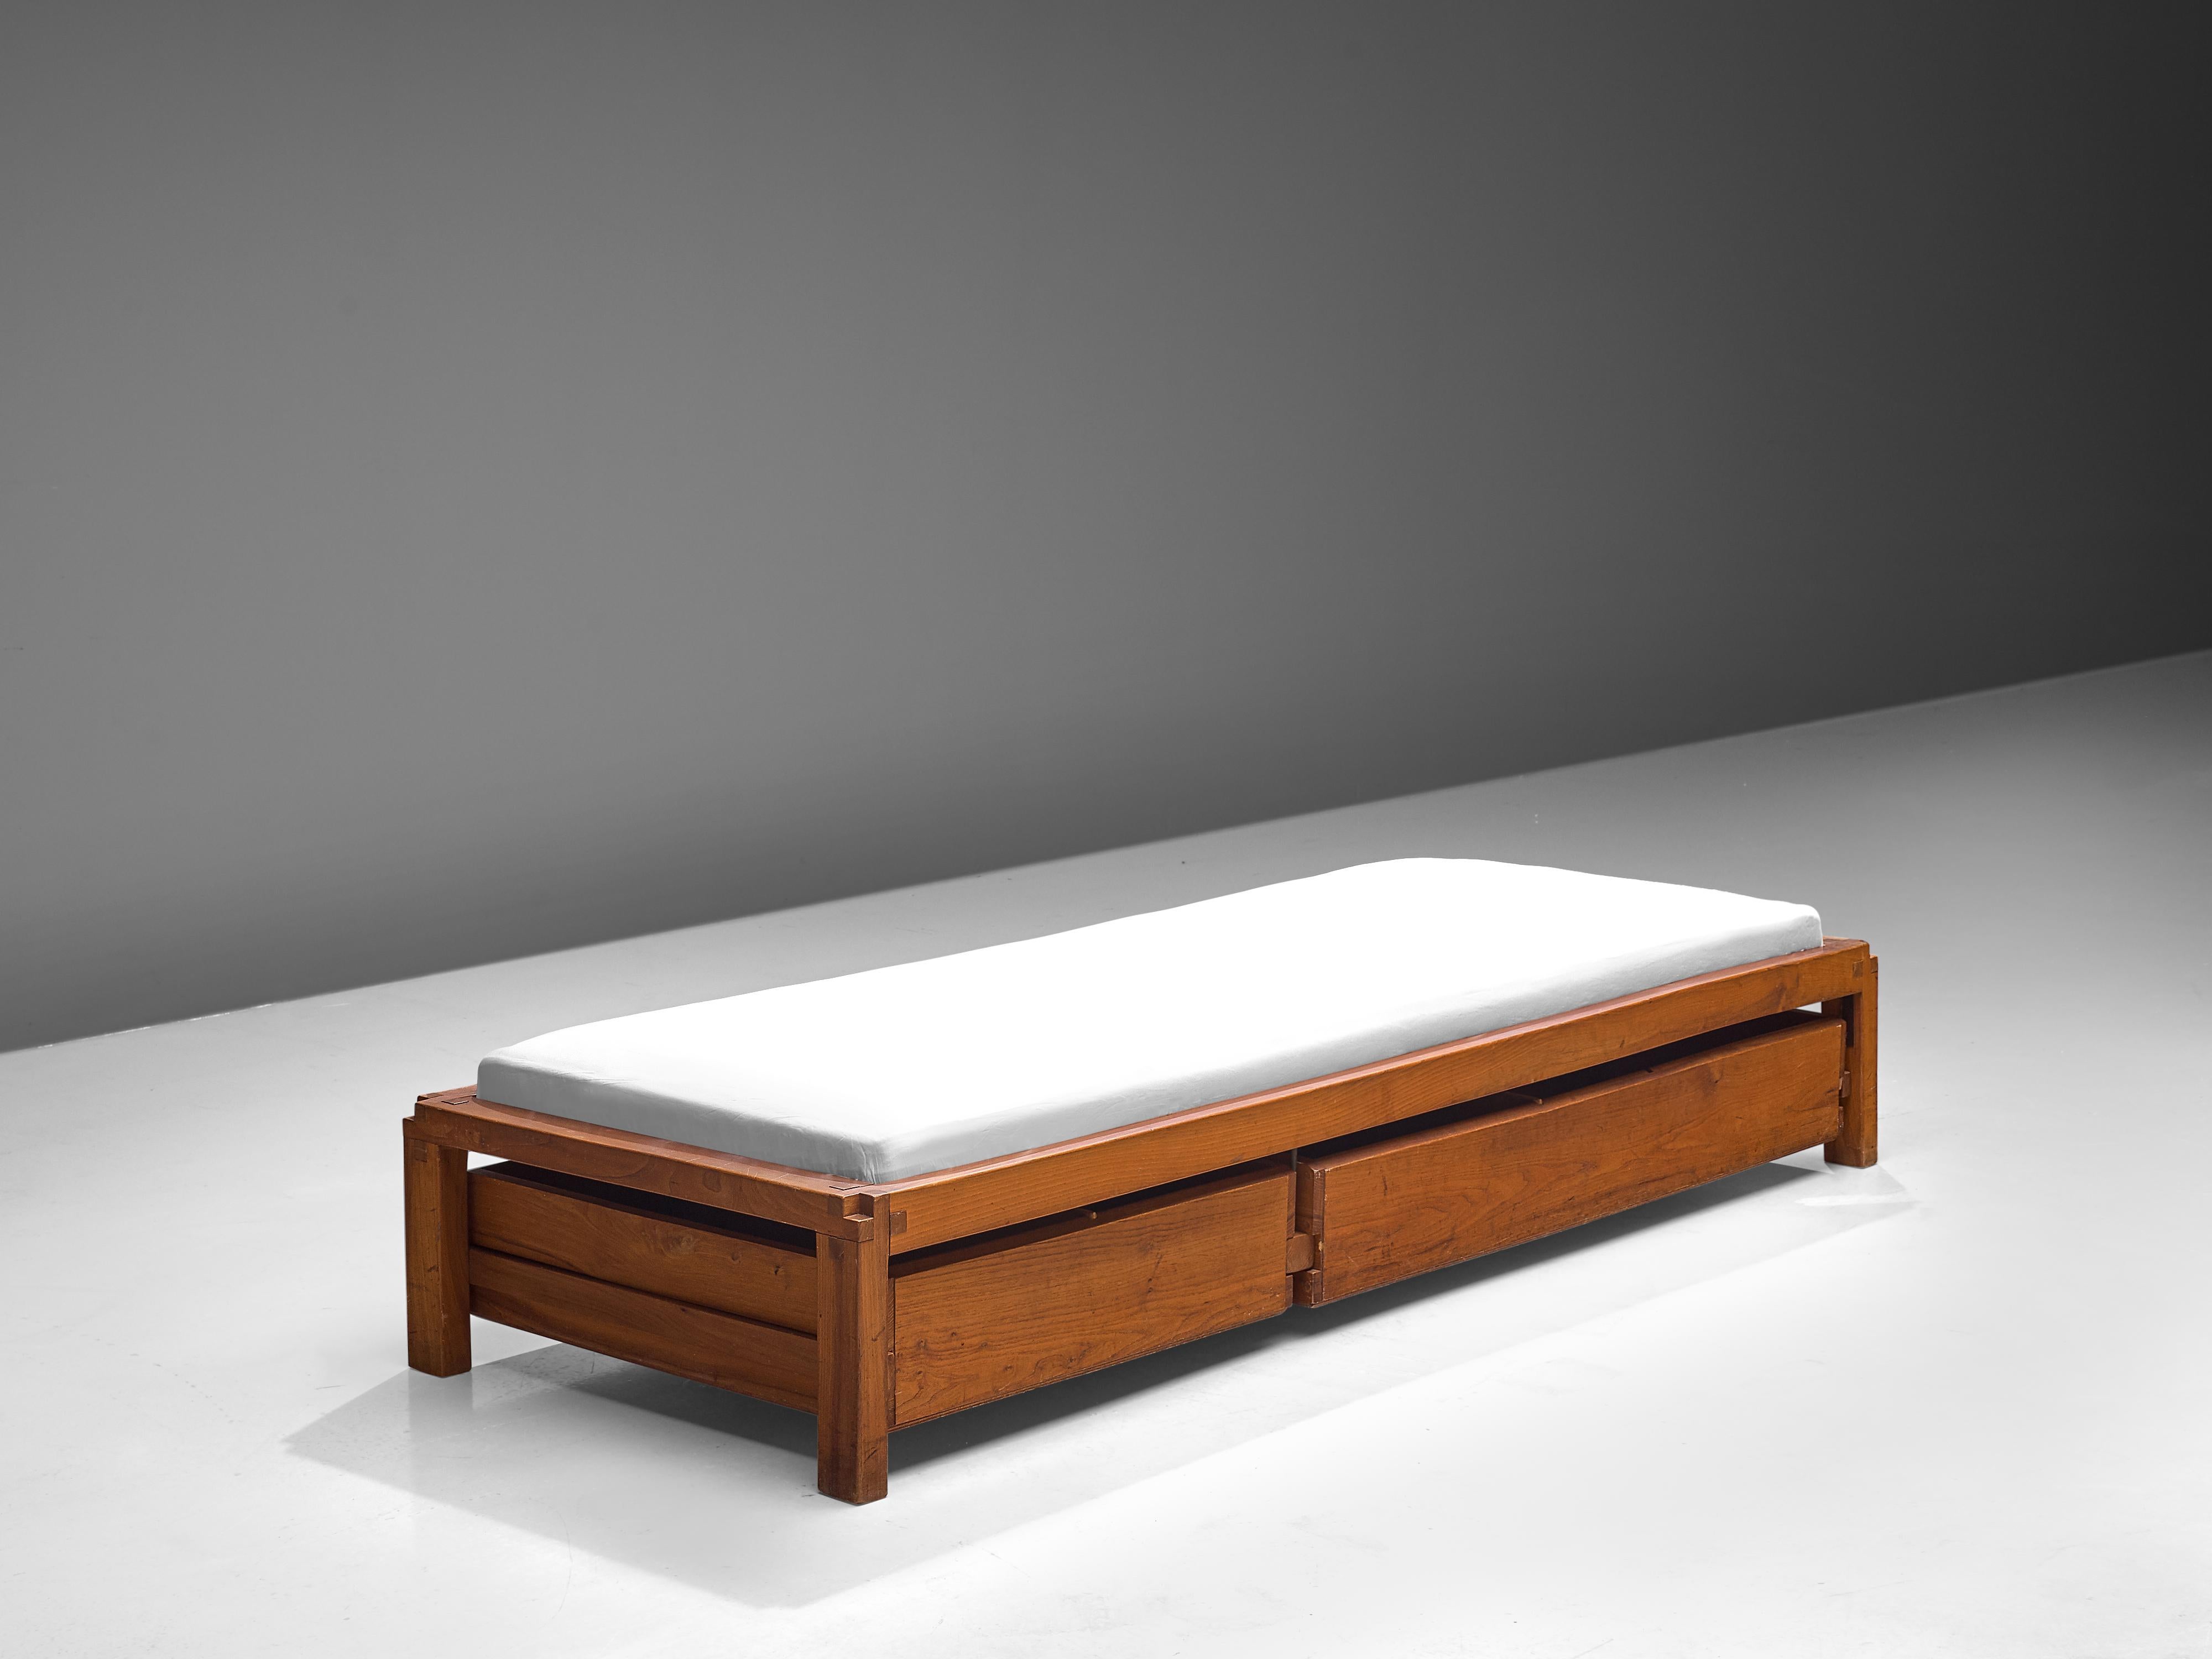 Pierre Chapo, single bed model L03, solid elm, France, 1965

Excellent designed single bed with the characteristic wood connections of Pierre Chapo. The L03 is a (day)bed whose minimal design was a rarity at that time - all superfluous elements were